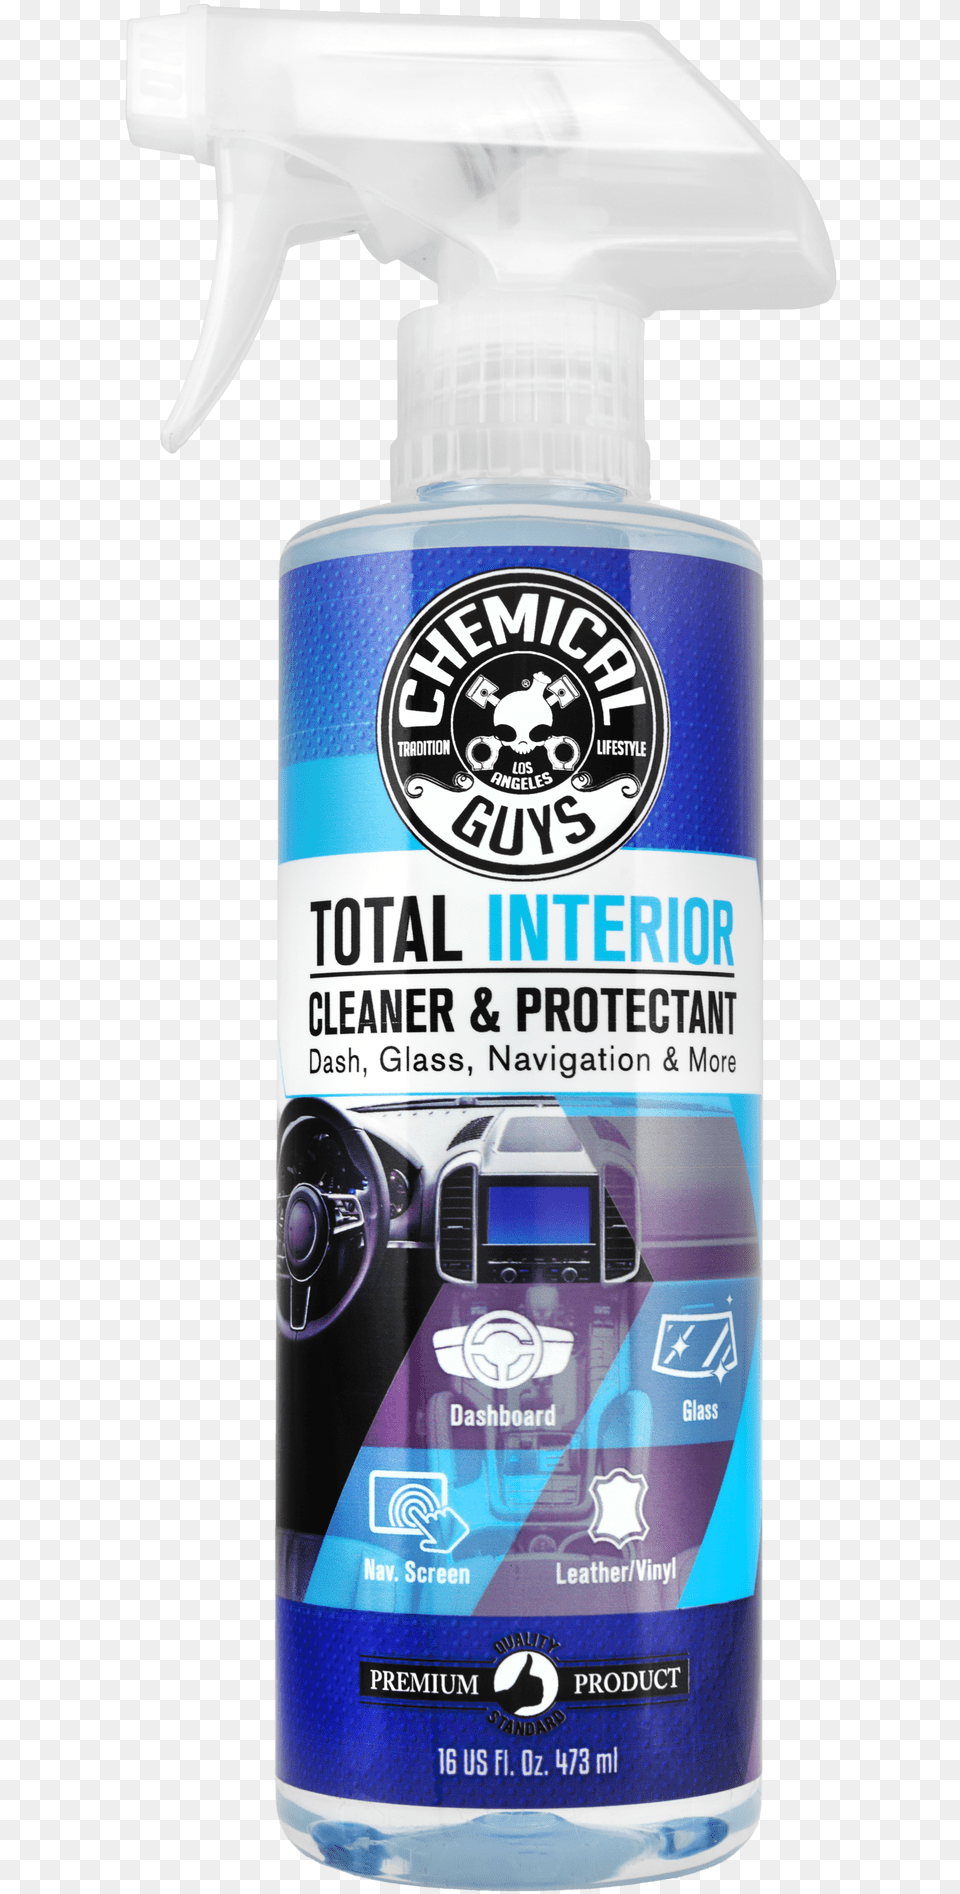 Total Interior Cleaner Ampamp Chemical Guys Total Interior Cleaner Amp Protectant, Bottle, Tin, Can, Alcohol Png